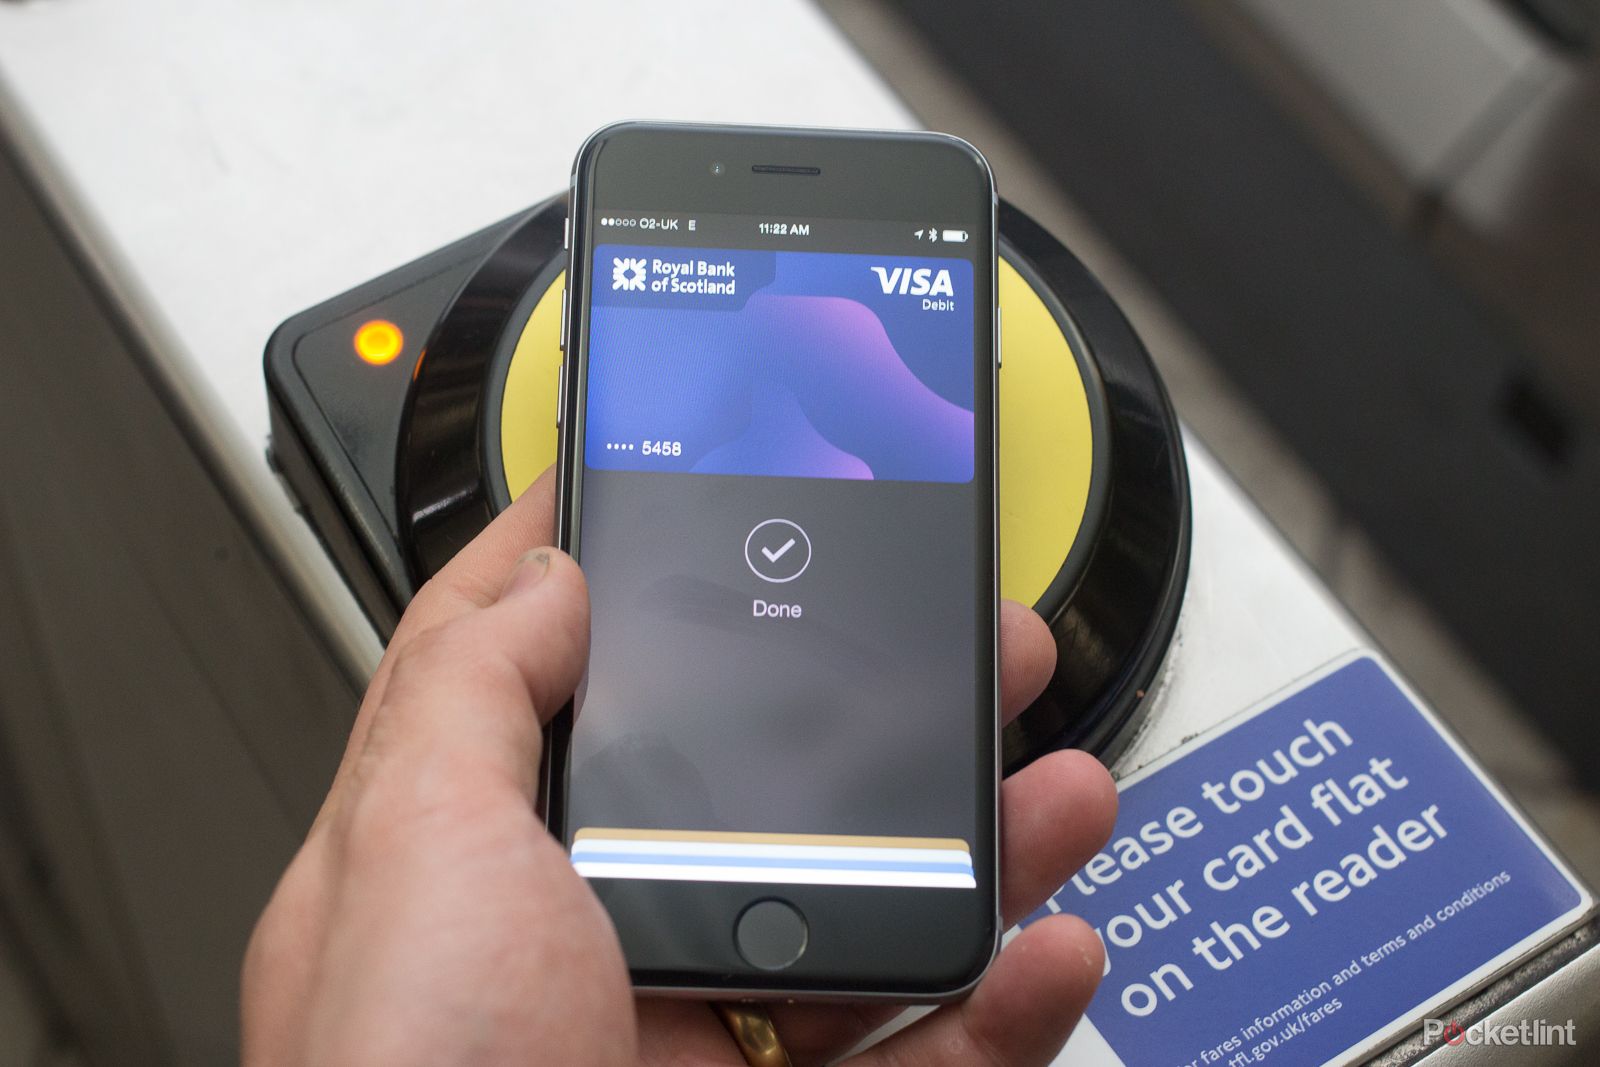 How to use Apple Pay on the London Underground